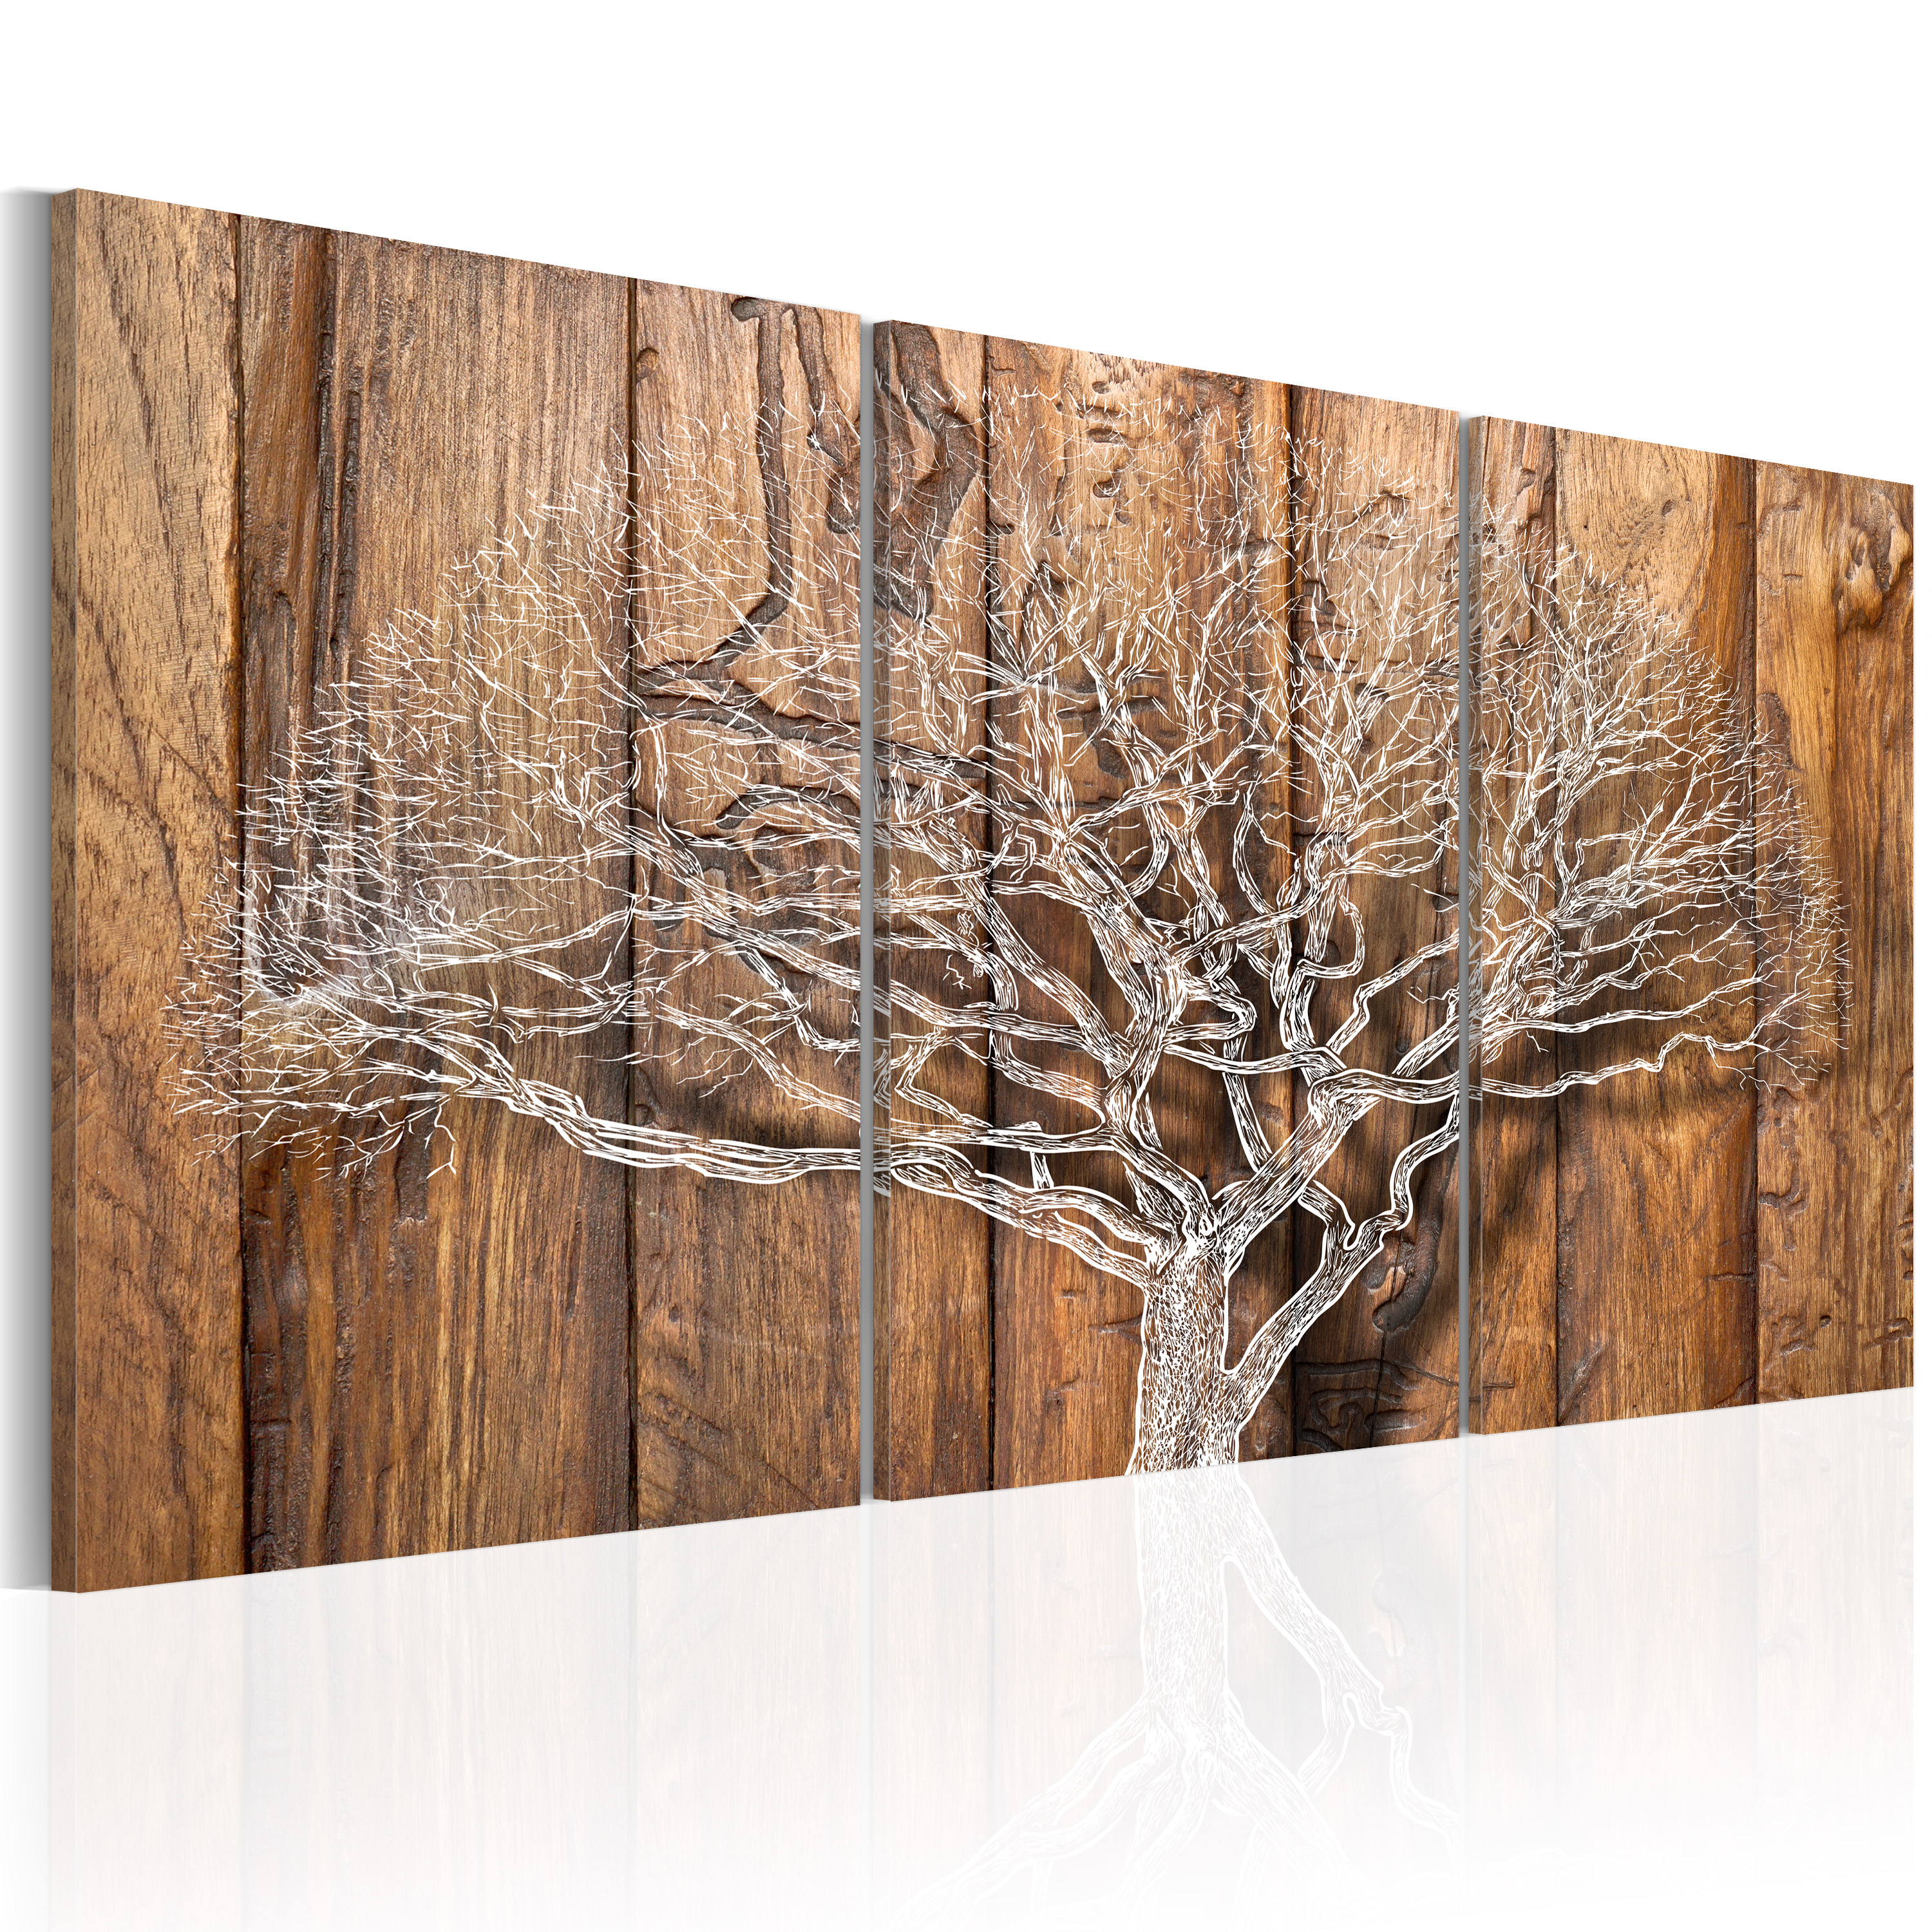 Canvas Print - Tale of the Wind - 120x60